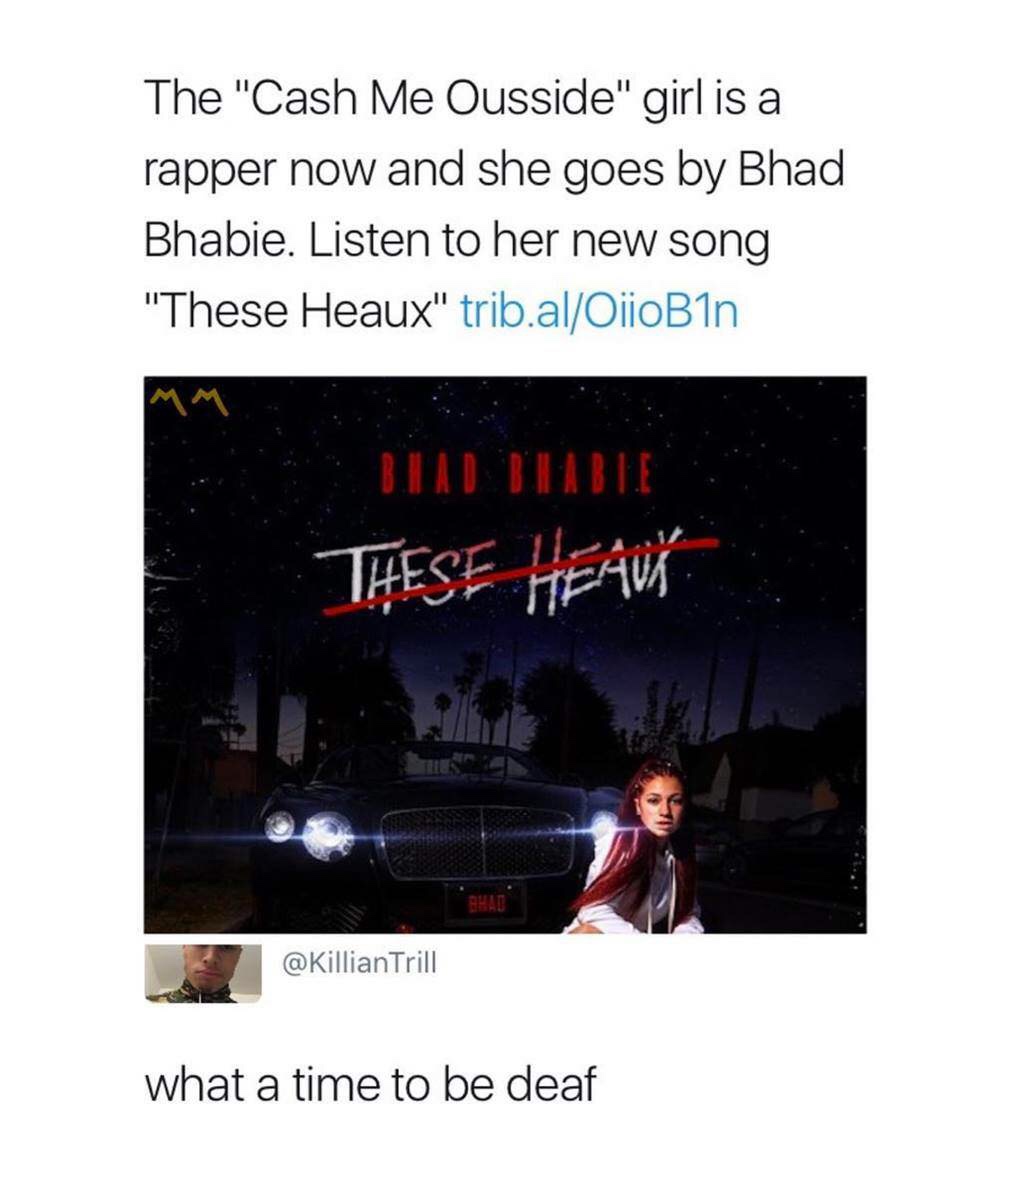 bhad bhabie these heaux - The "Cash Me Ousside" girl is a rapper now and she goes by Bhad Bhabie. Listen to her new song "These Heaux" trib.alOiioB1n These Heavy Trill what a time to be deaf